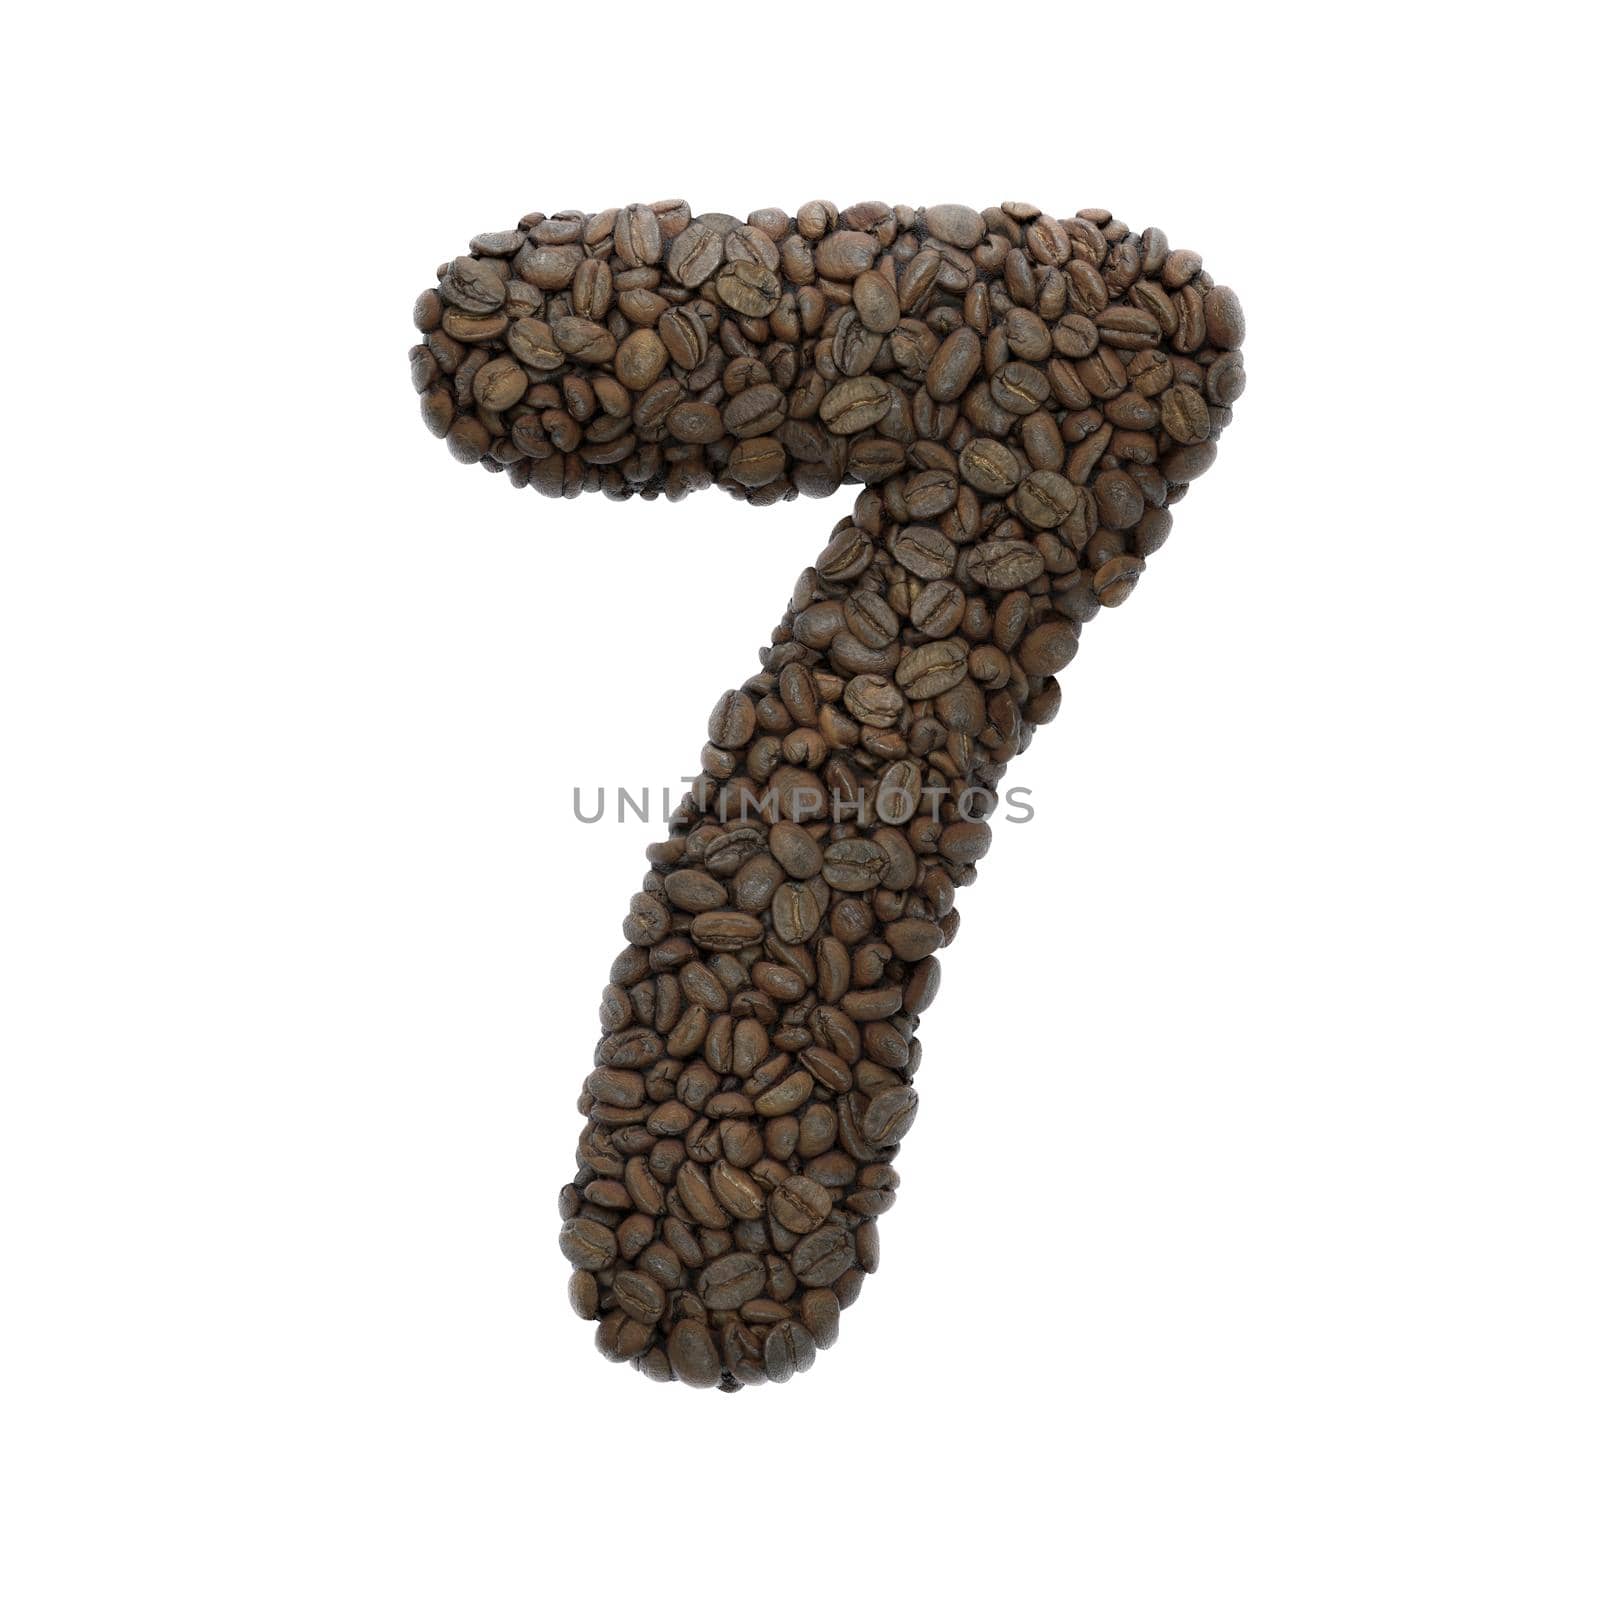 Coffee number 7 - 3d roasted beans digit isolated on white background. This alphabet is perfect for creative illustrations related but not limited to Coffee, energy, insomnia...